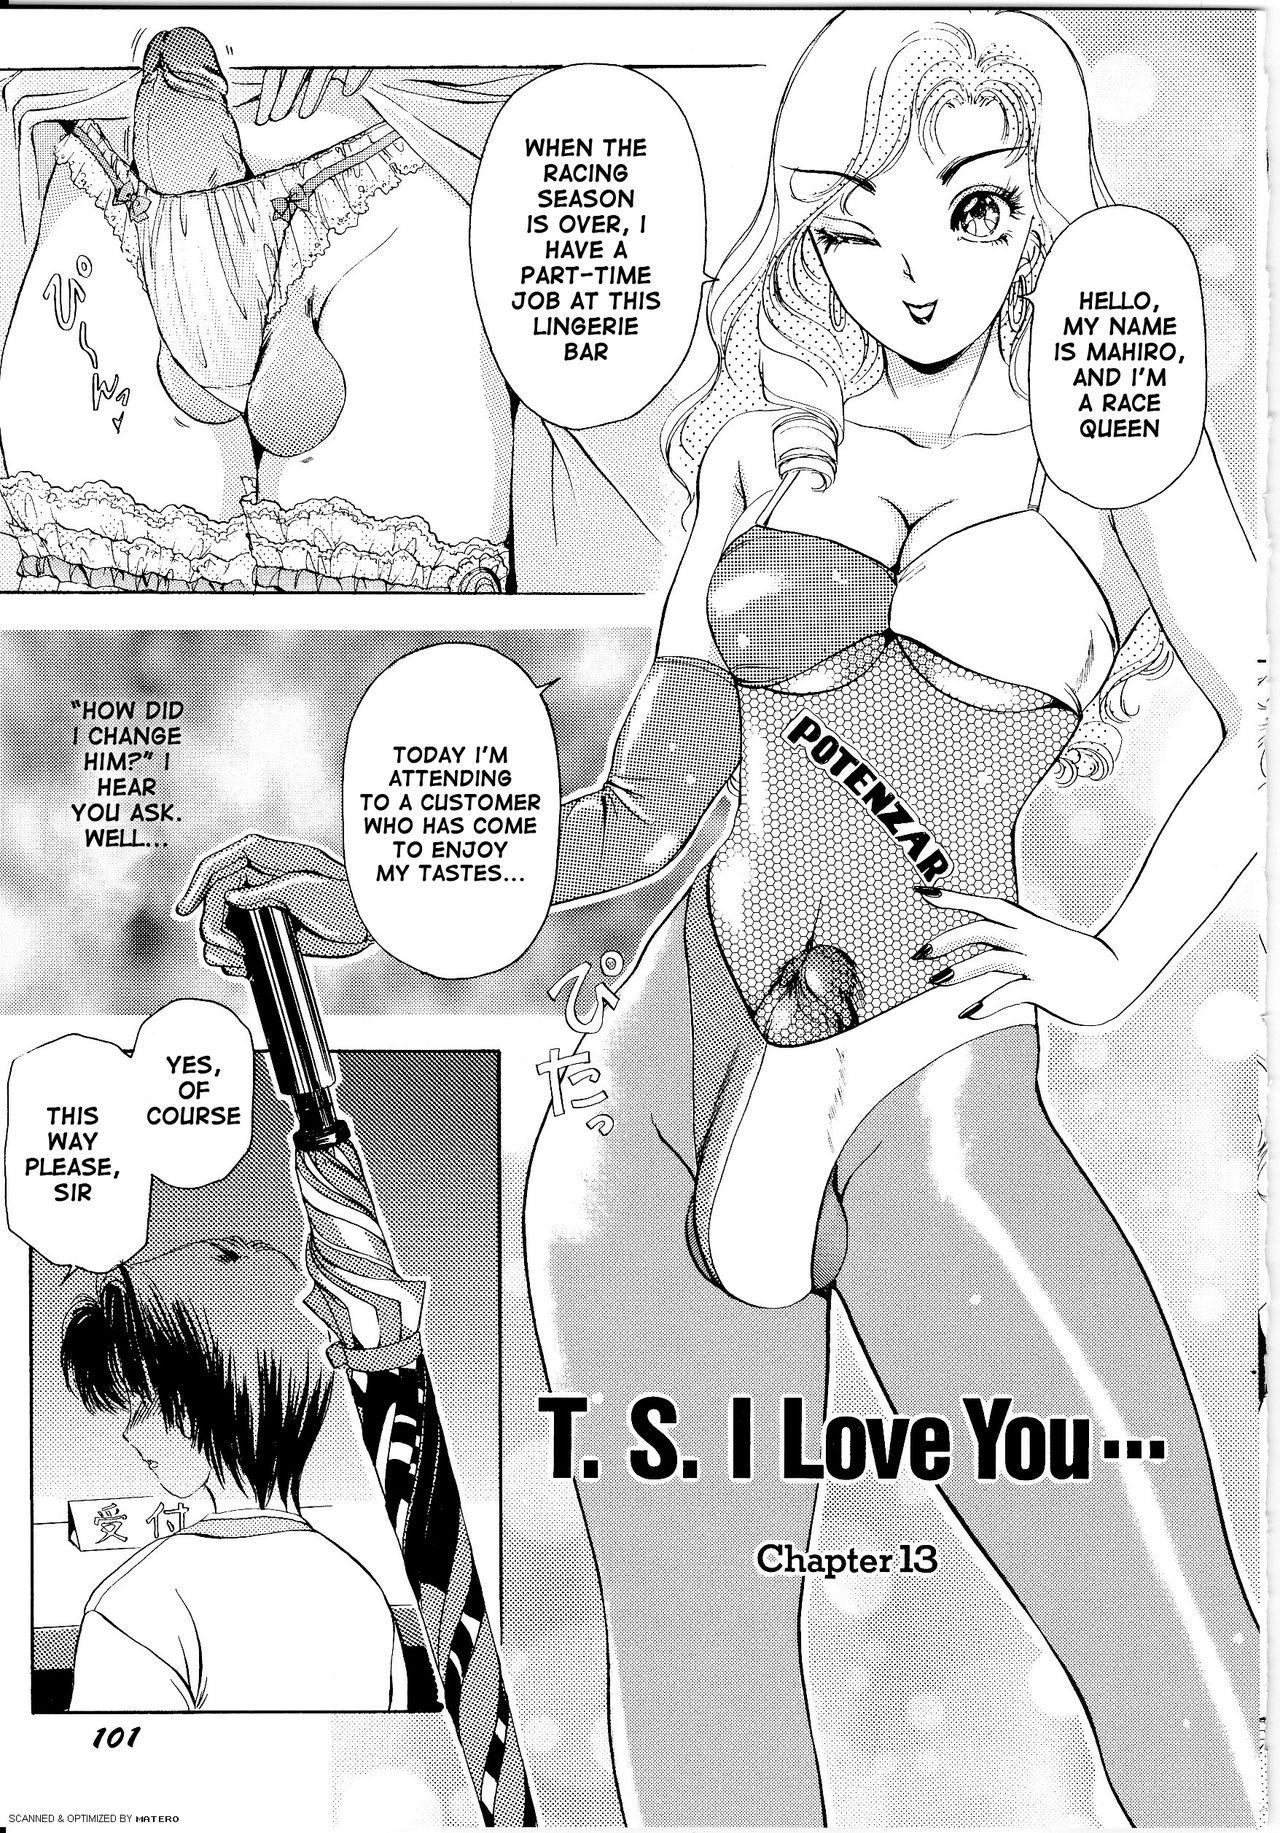 T.S. I LOVE YOU... 1 Chapter 13 1